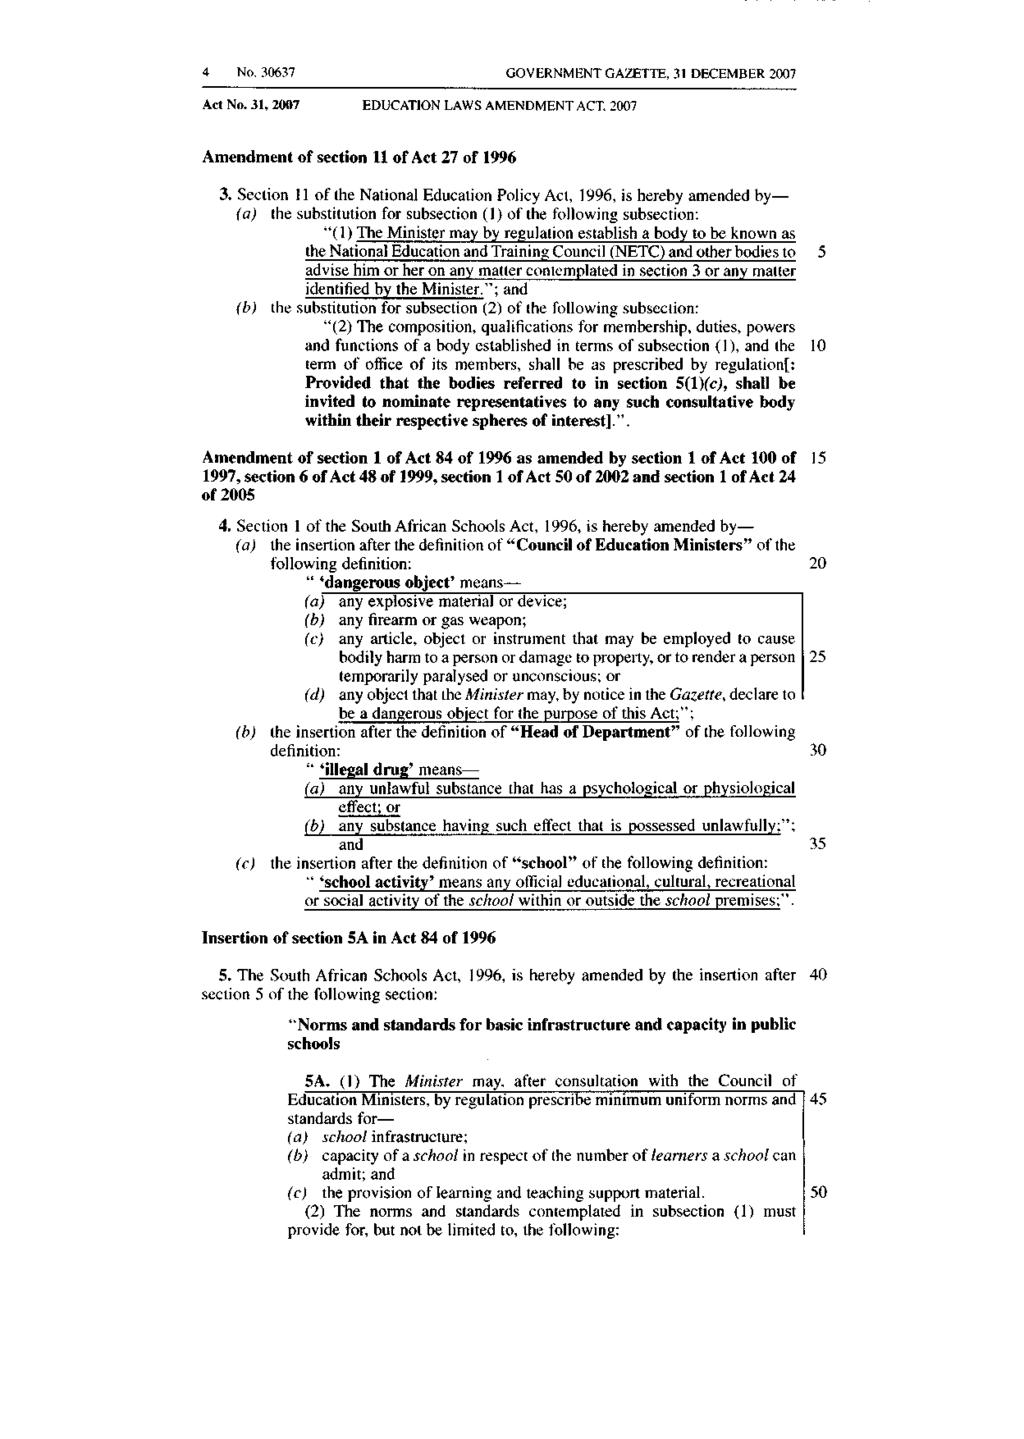 Amendment of section 11 of Act 27 of 1996 3.